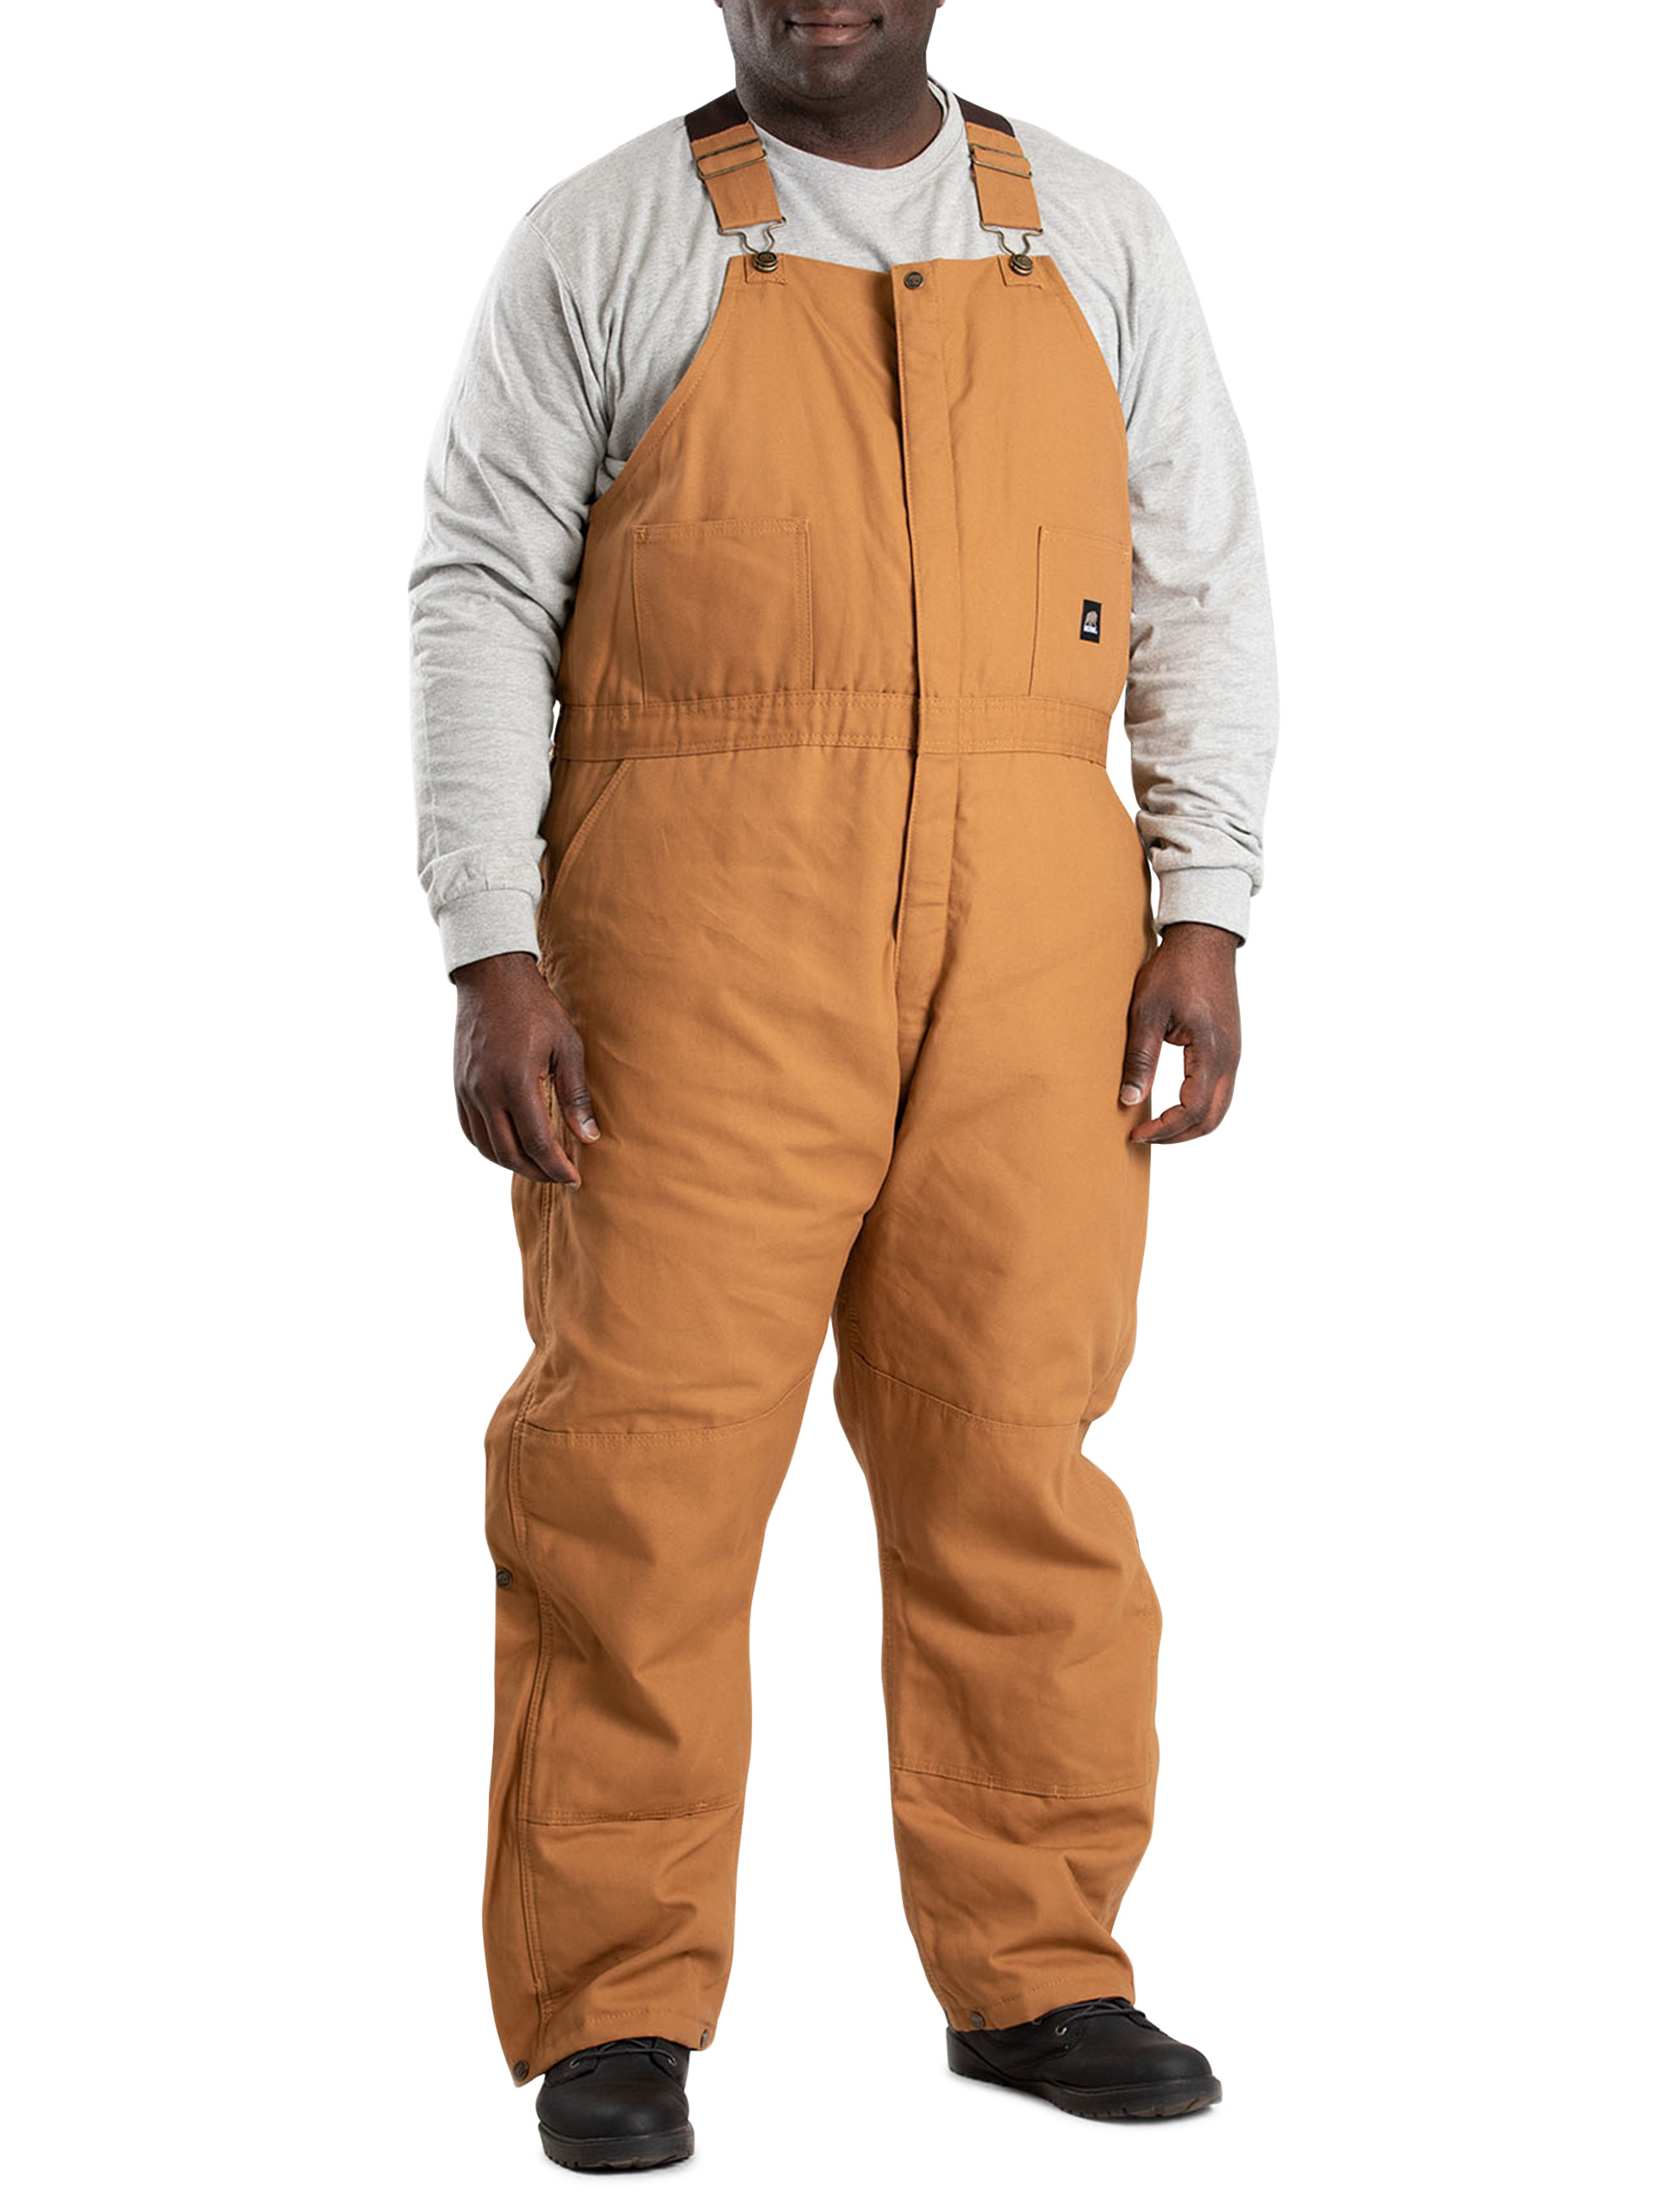 Thermal Bibs, Overalls, Coveralls